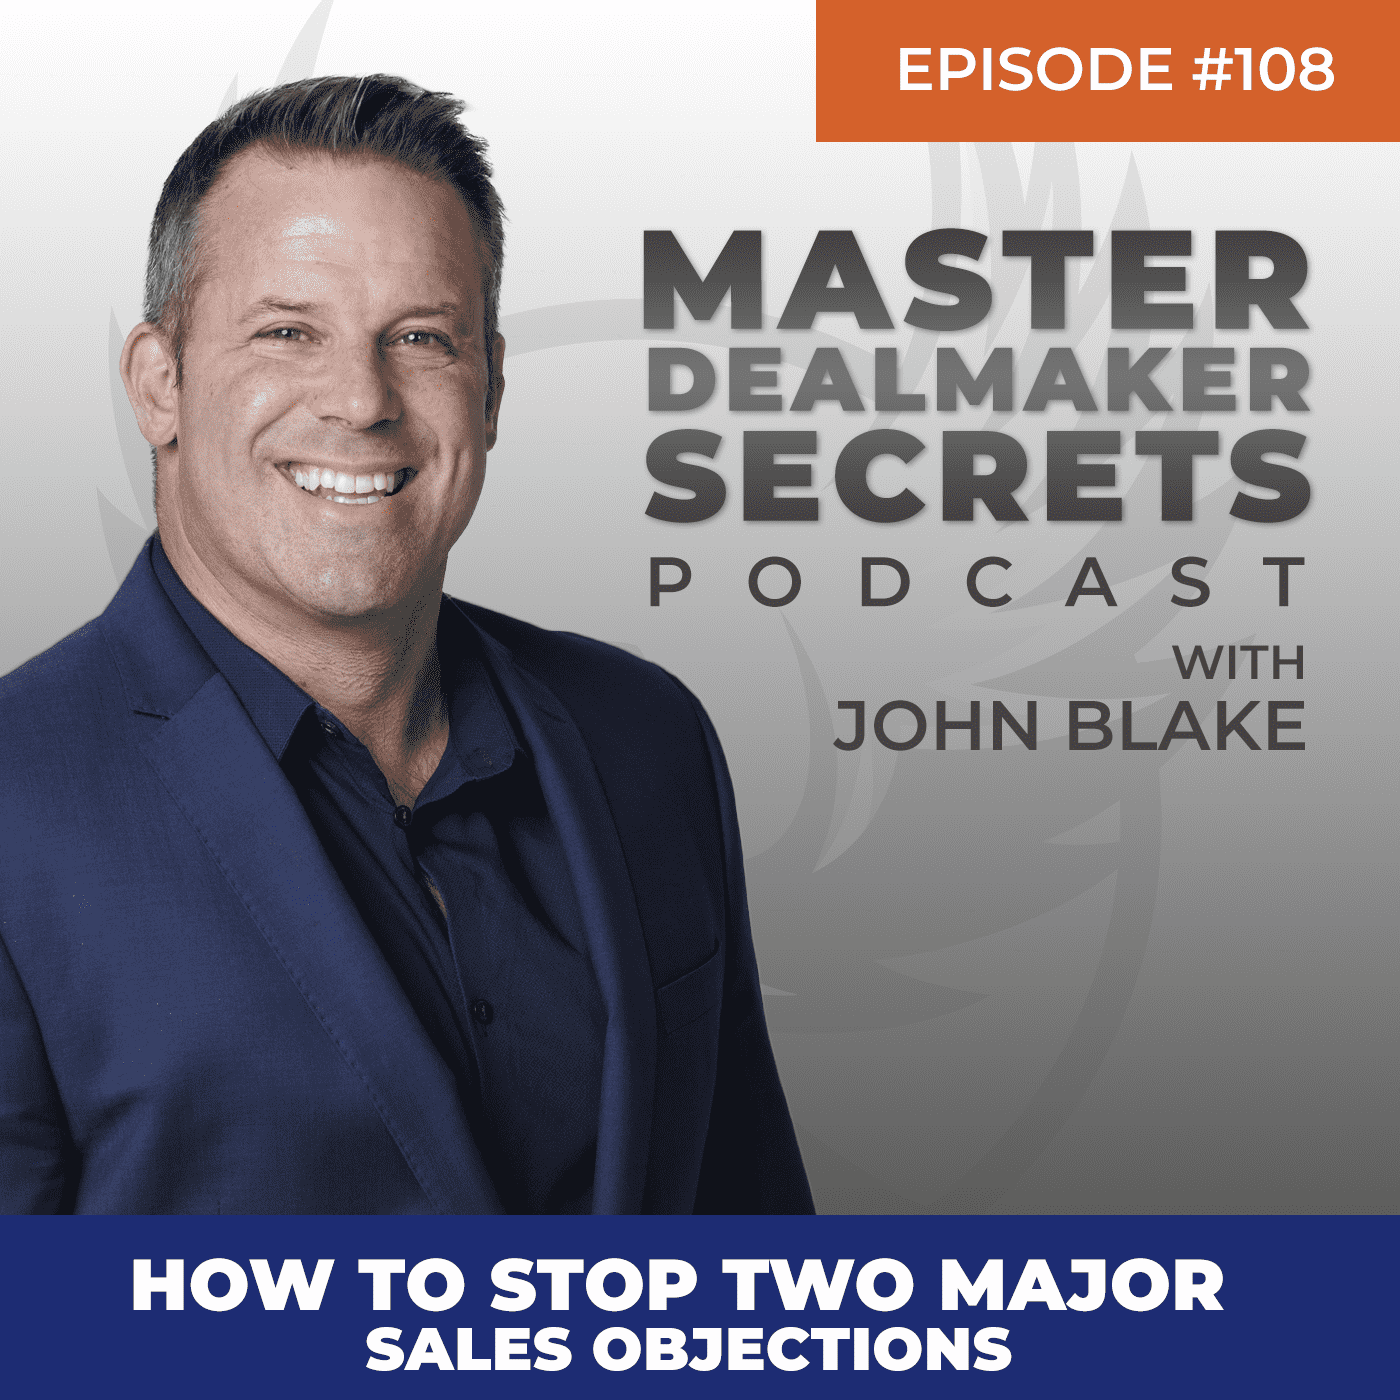 John Blake How to Stop Two Major Sales Objections